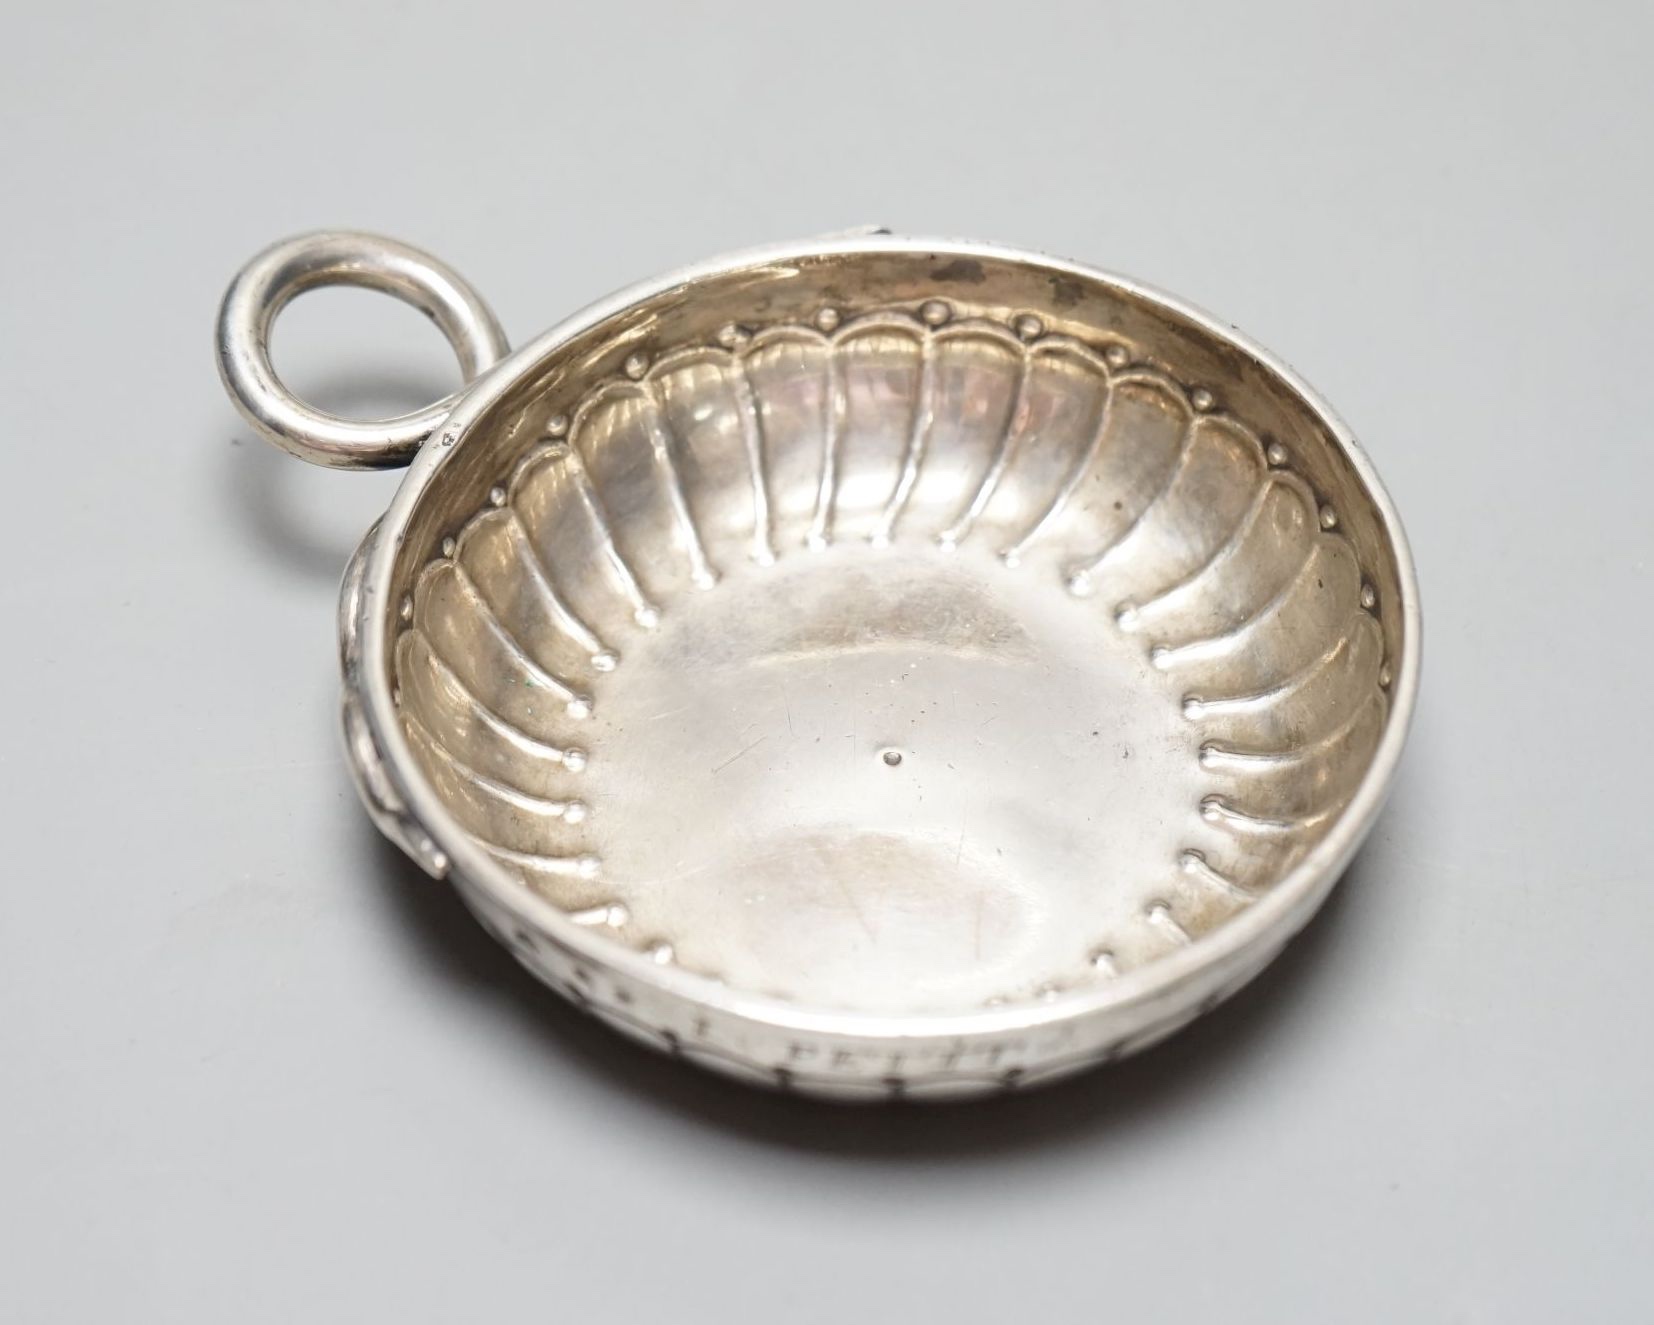 A late 18th/early 19th century French white metal taste vin, with engraved inscription and ring handle, 11.6cm over handle, 122 grams.